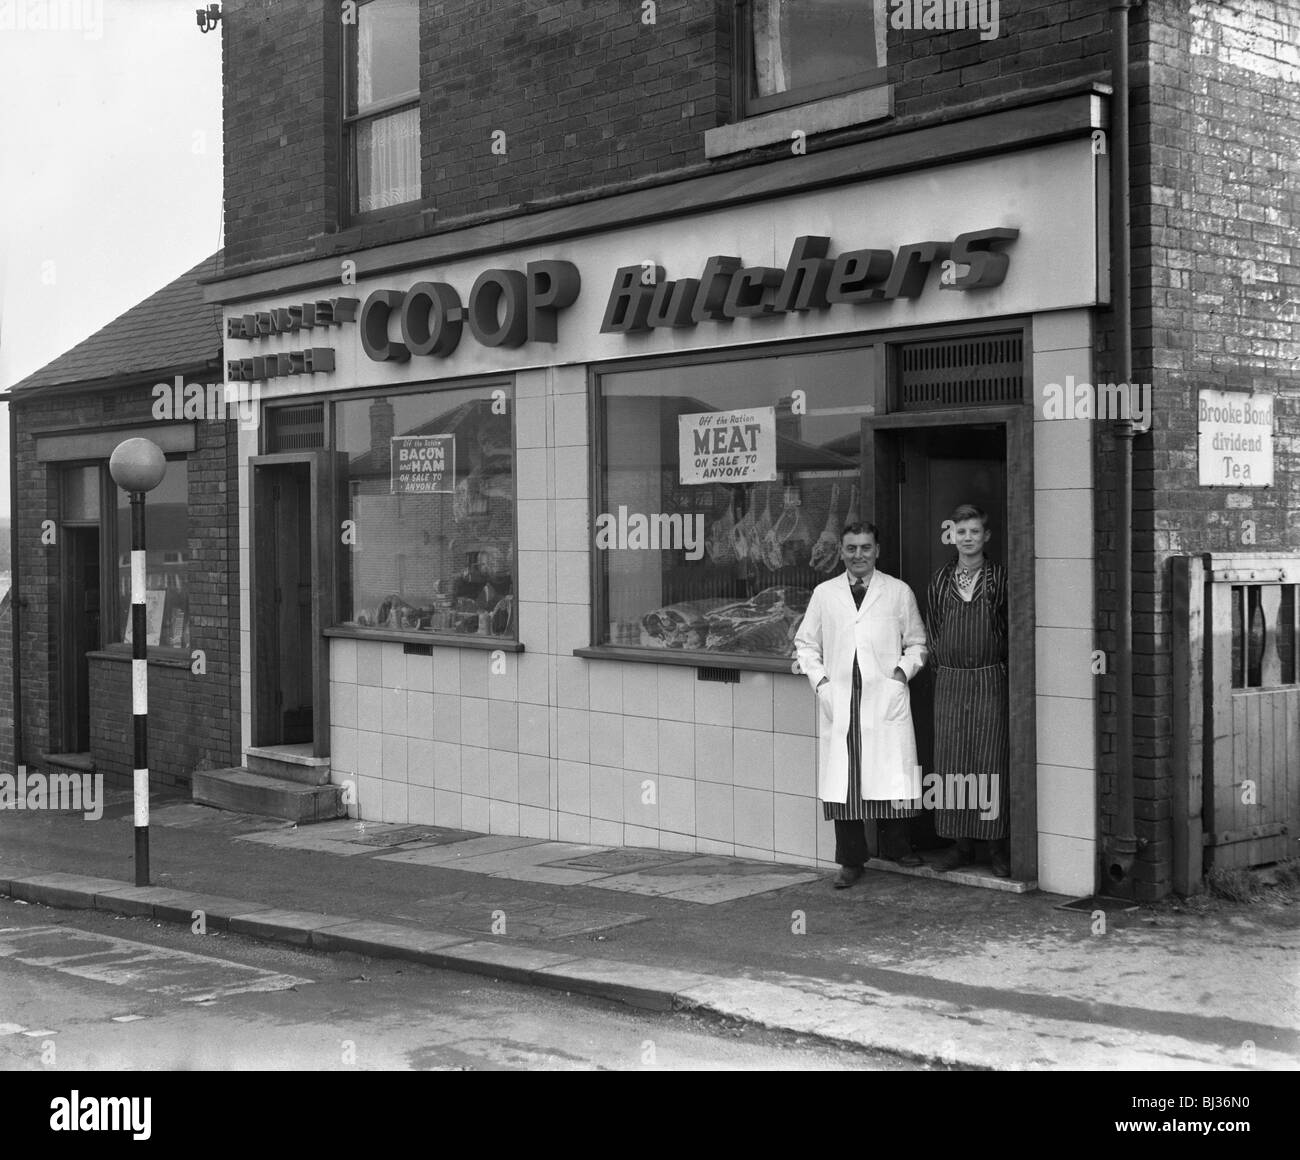 End of rationing, meat and bacon on sale at the Barnsley Co-op butchers, South Yorkshire, 1954. Artist: Michael Walters Stock Photo